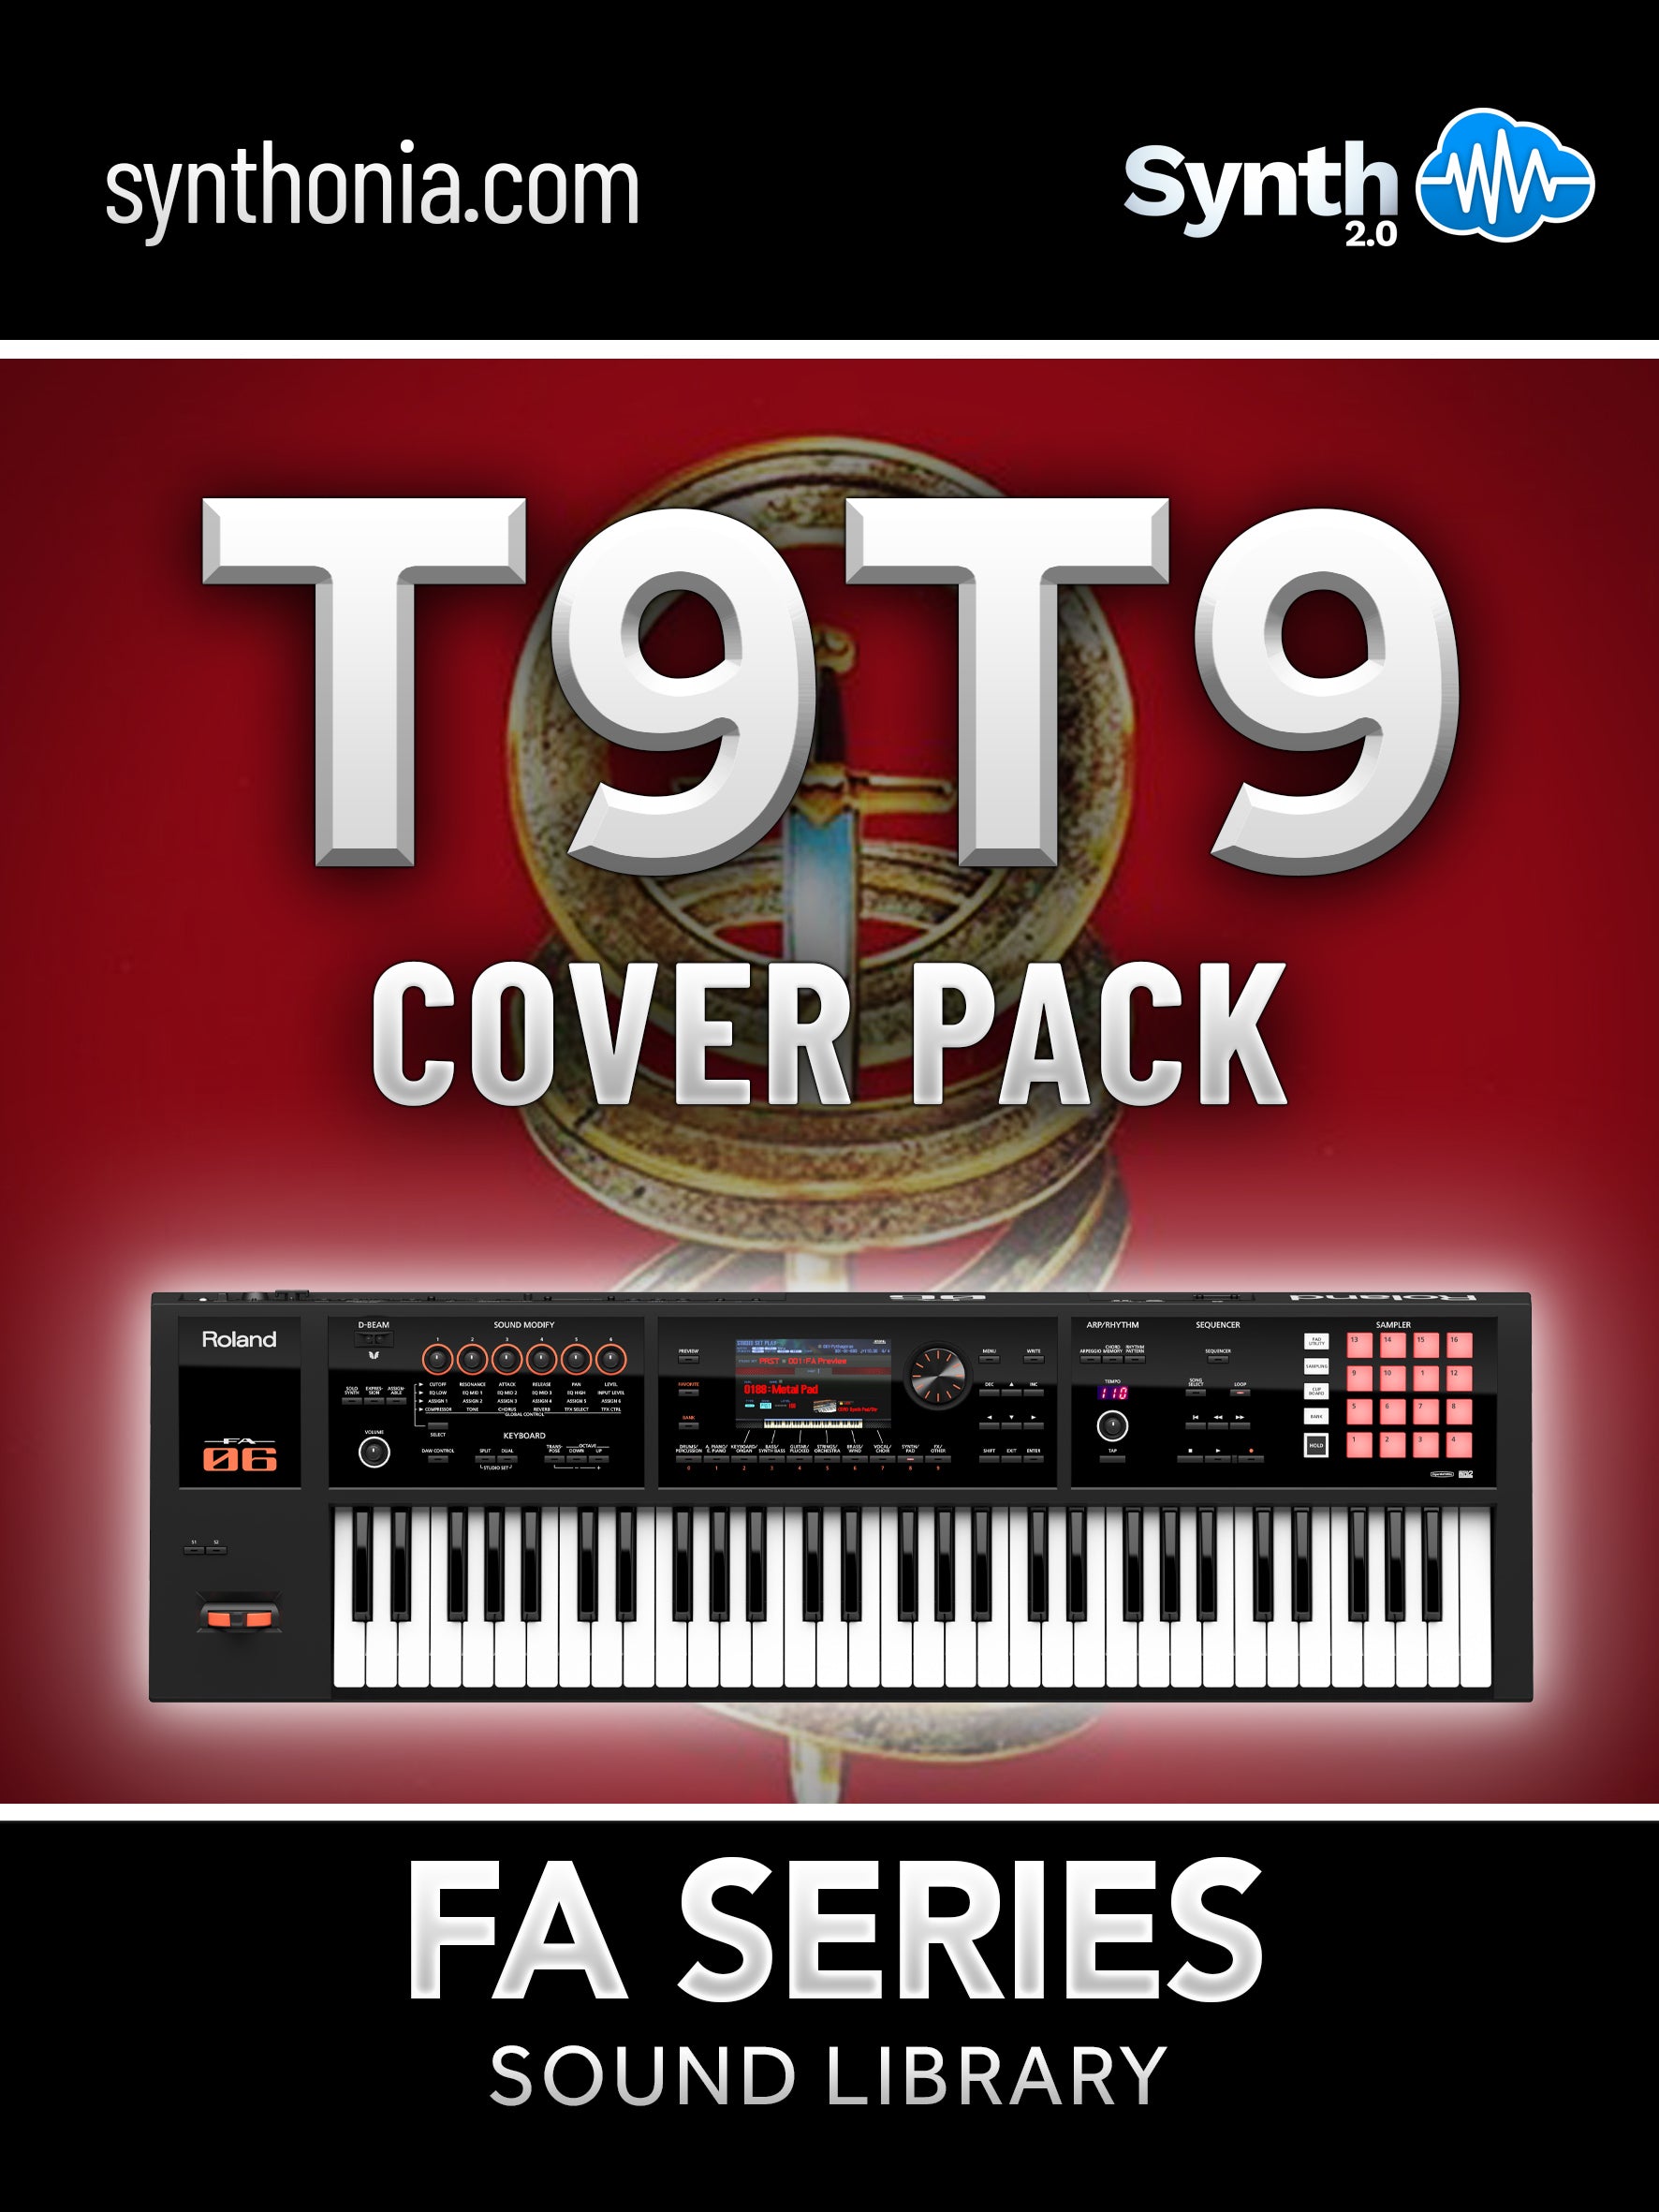 LDX181 - T9T9 Cover Pack - FA Series ( 11 presets )